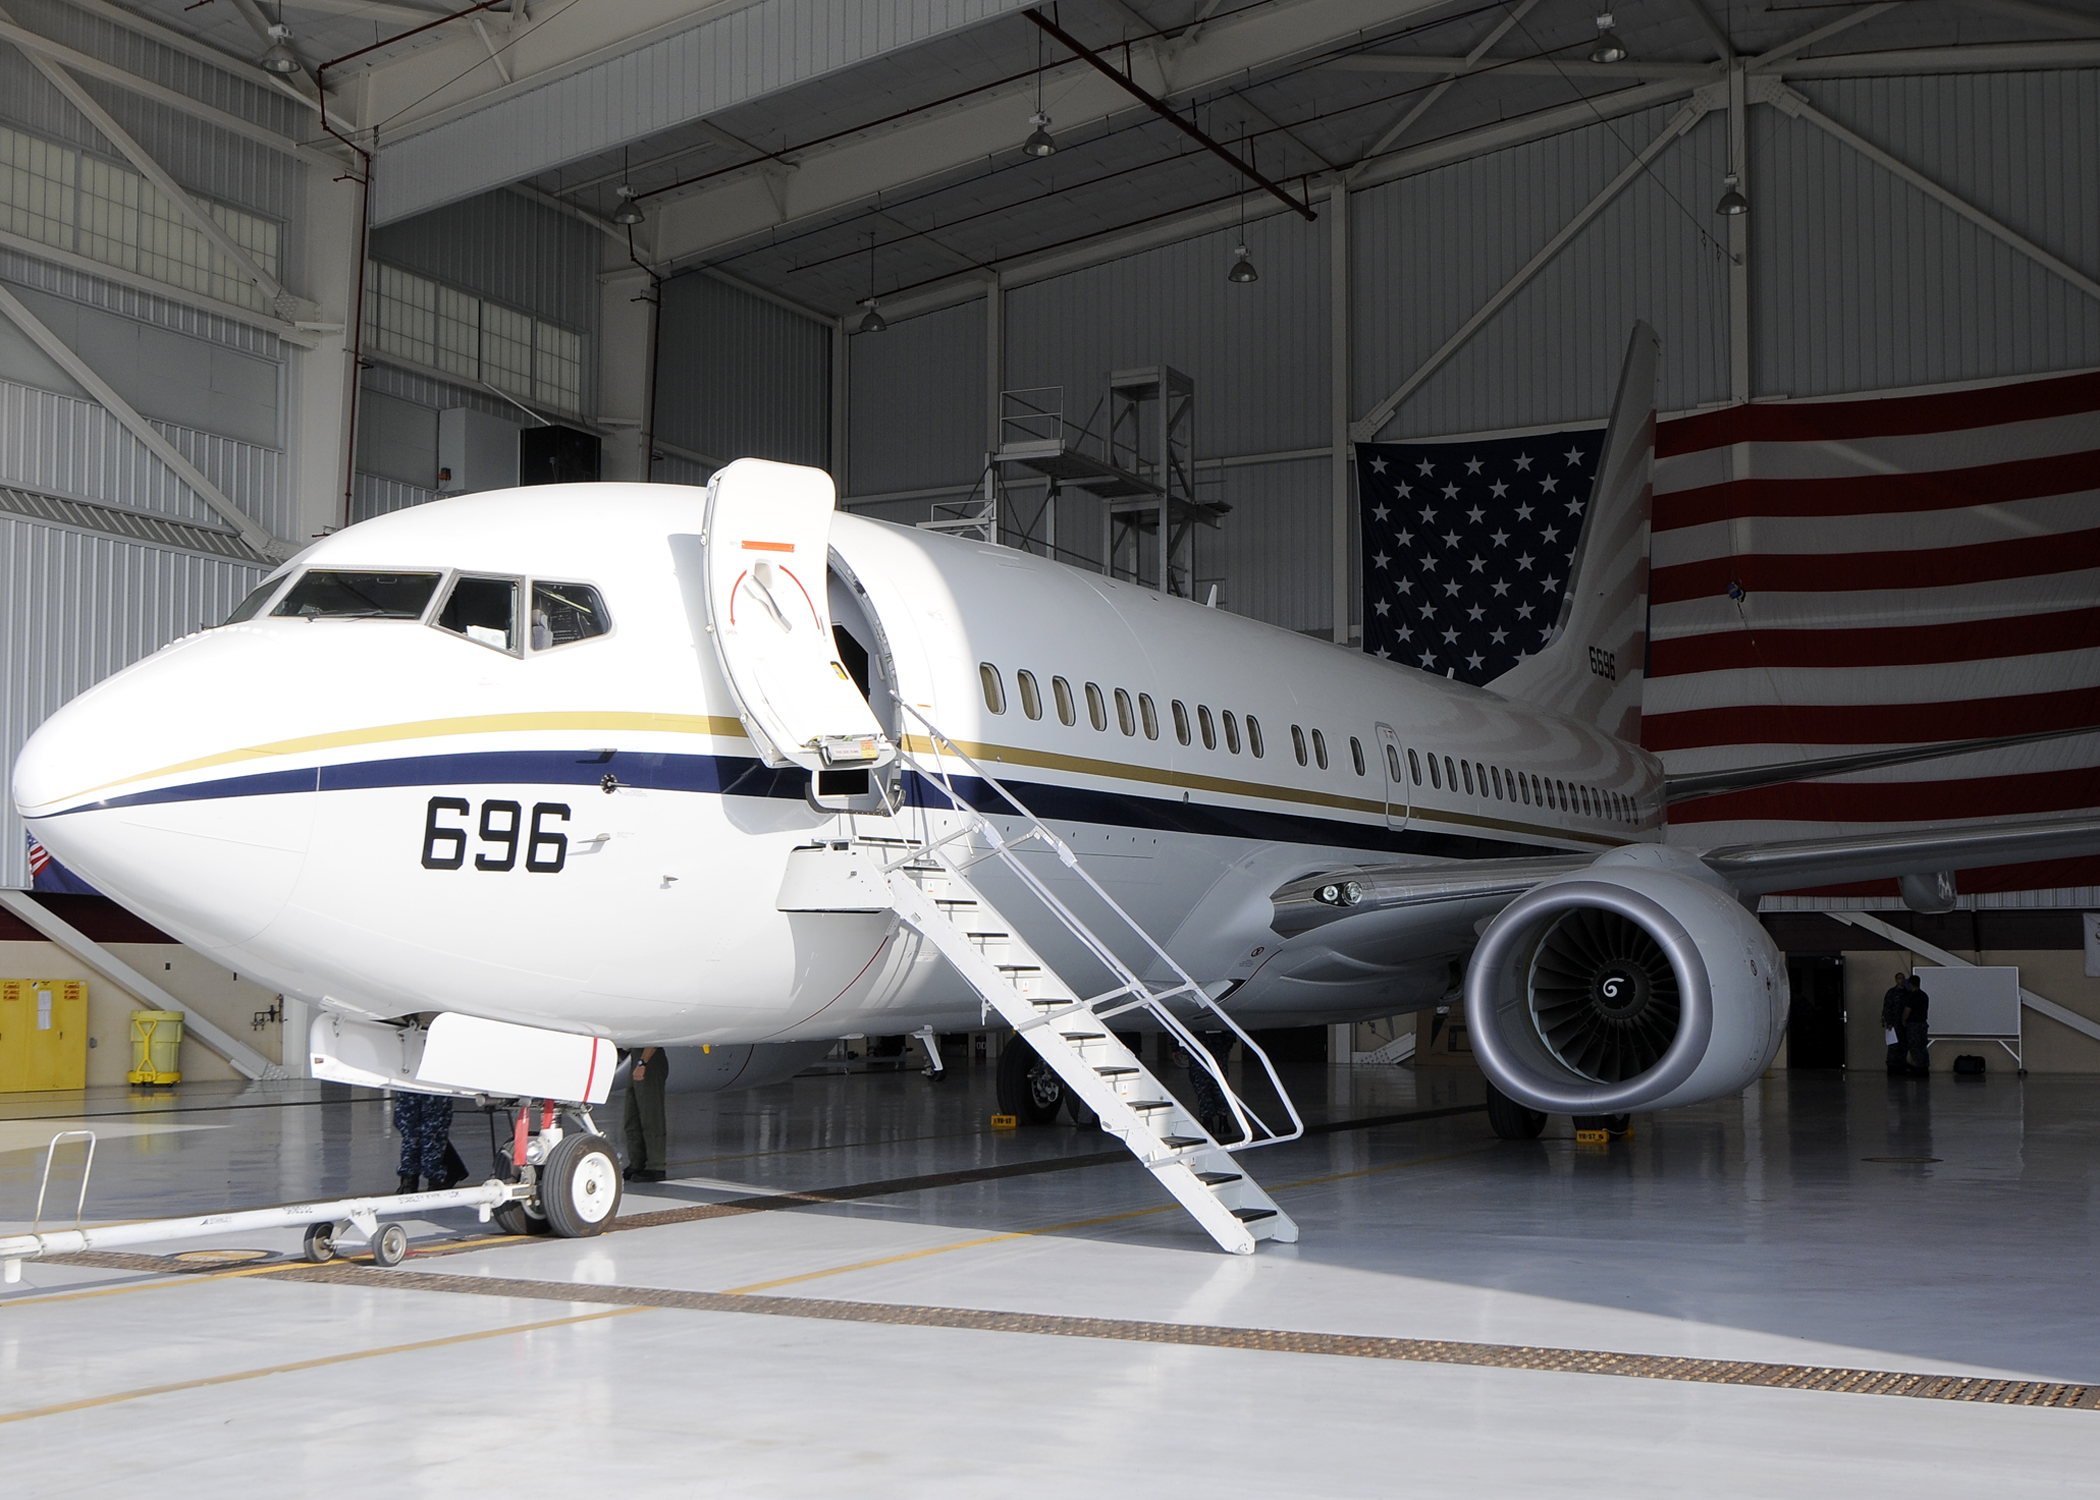 US Navy 111021-N-WD757-218 A C-40 Clipper assigned to Fleet Logistics Support Squadron (VR) 57 is in a hangar after arriving in Naval Air Station N